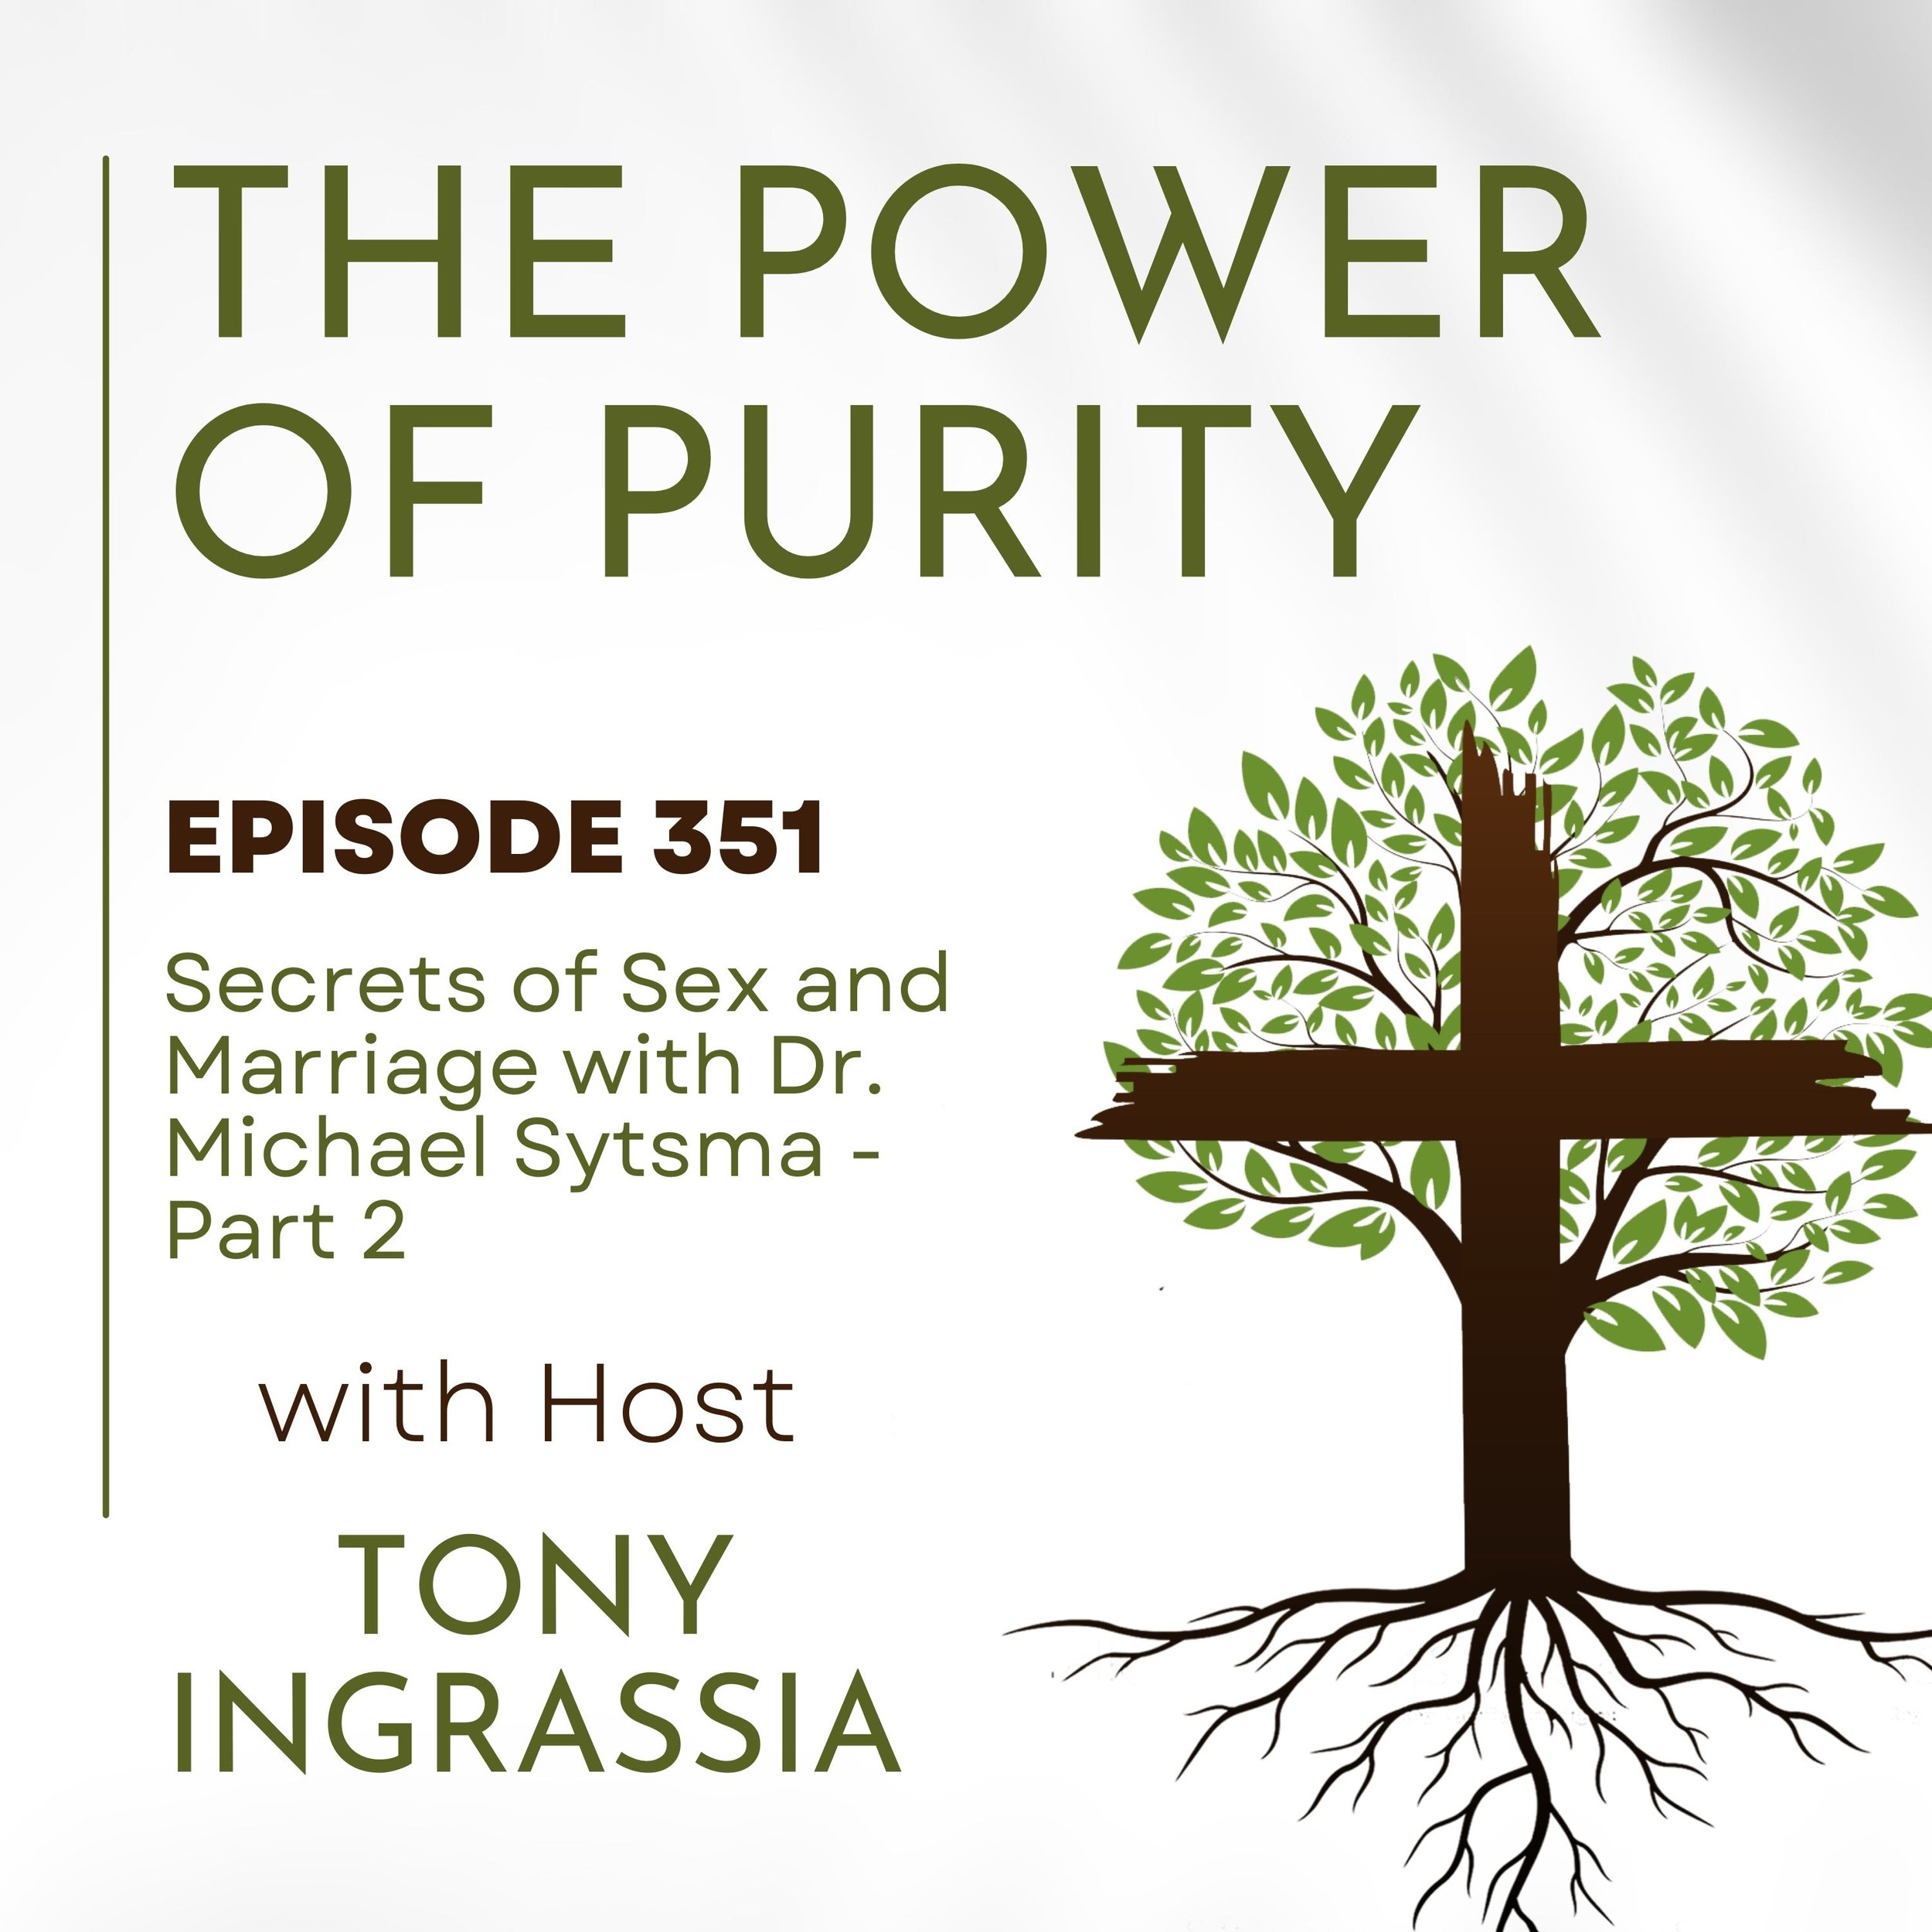 The Power of Purity Podcast, Episode 351 - Secrets of Sex and Marriage with Dr